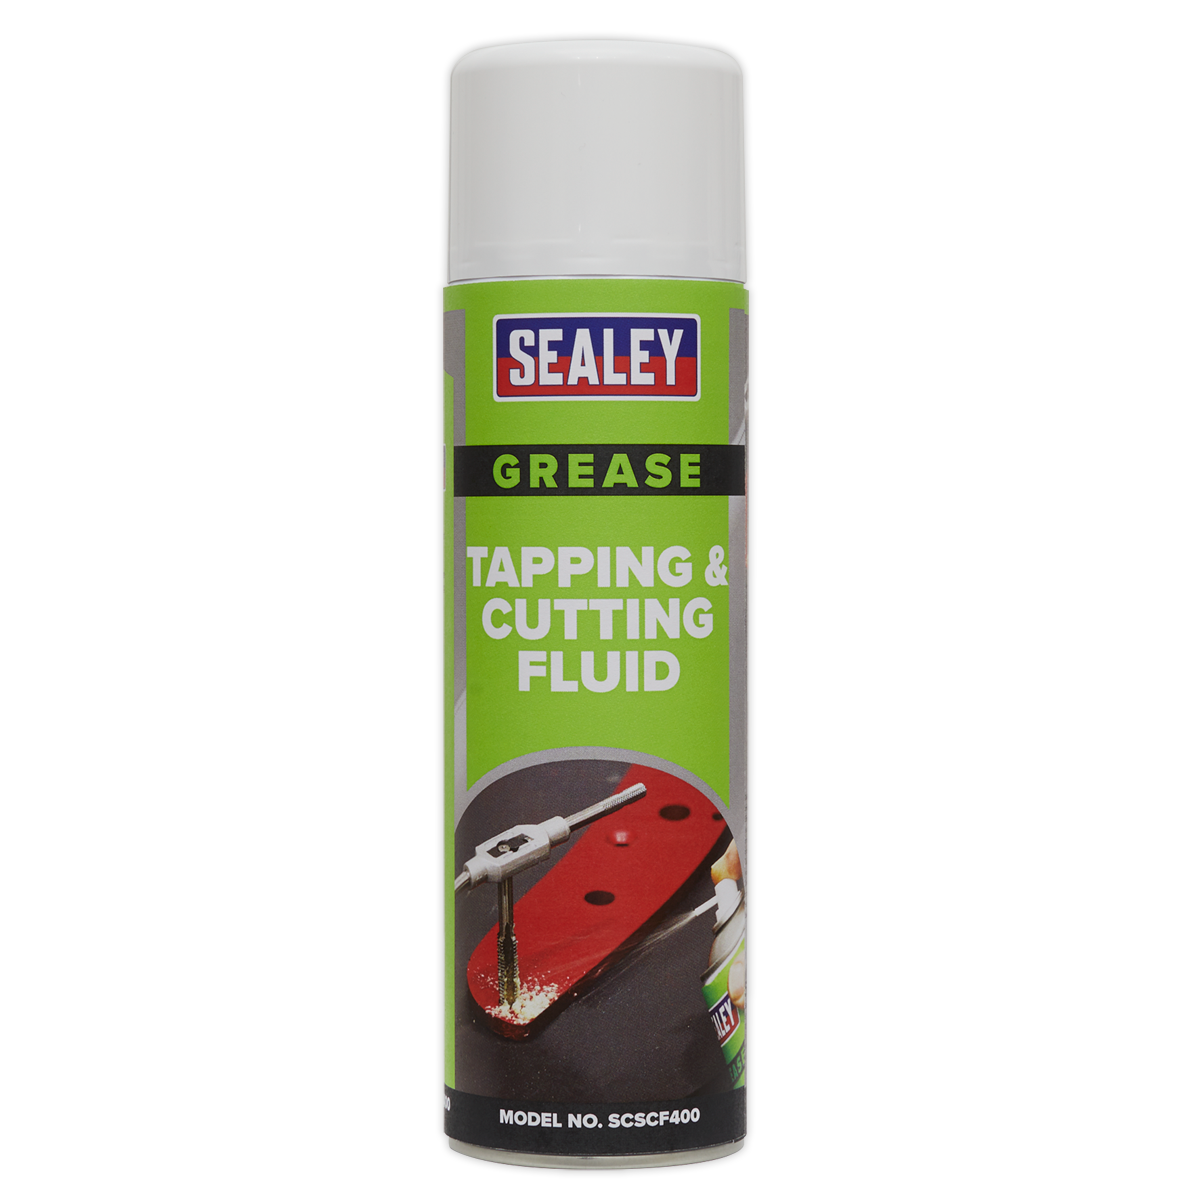 Sealey Tapping & Cutting Fluid 500ml